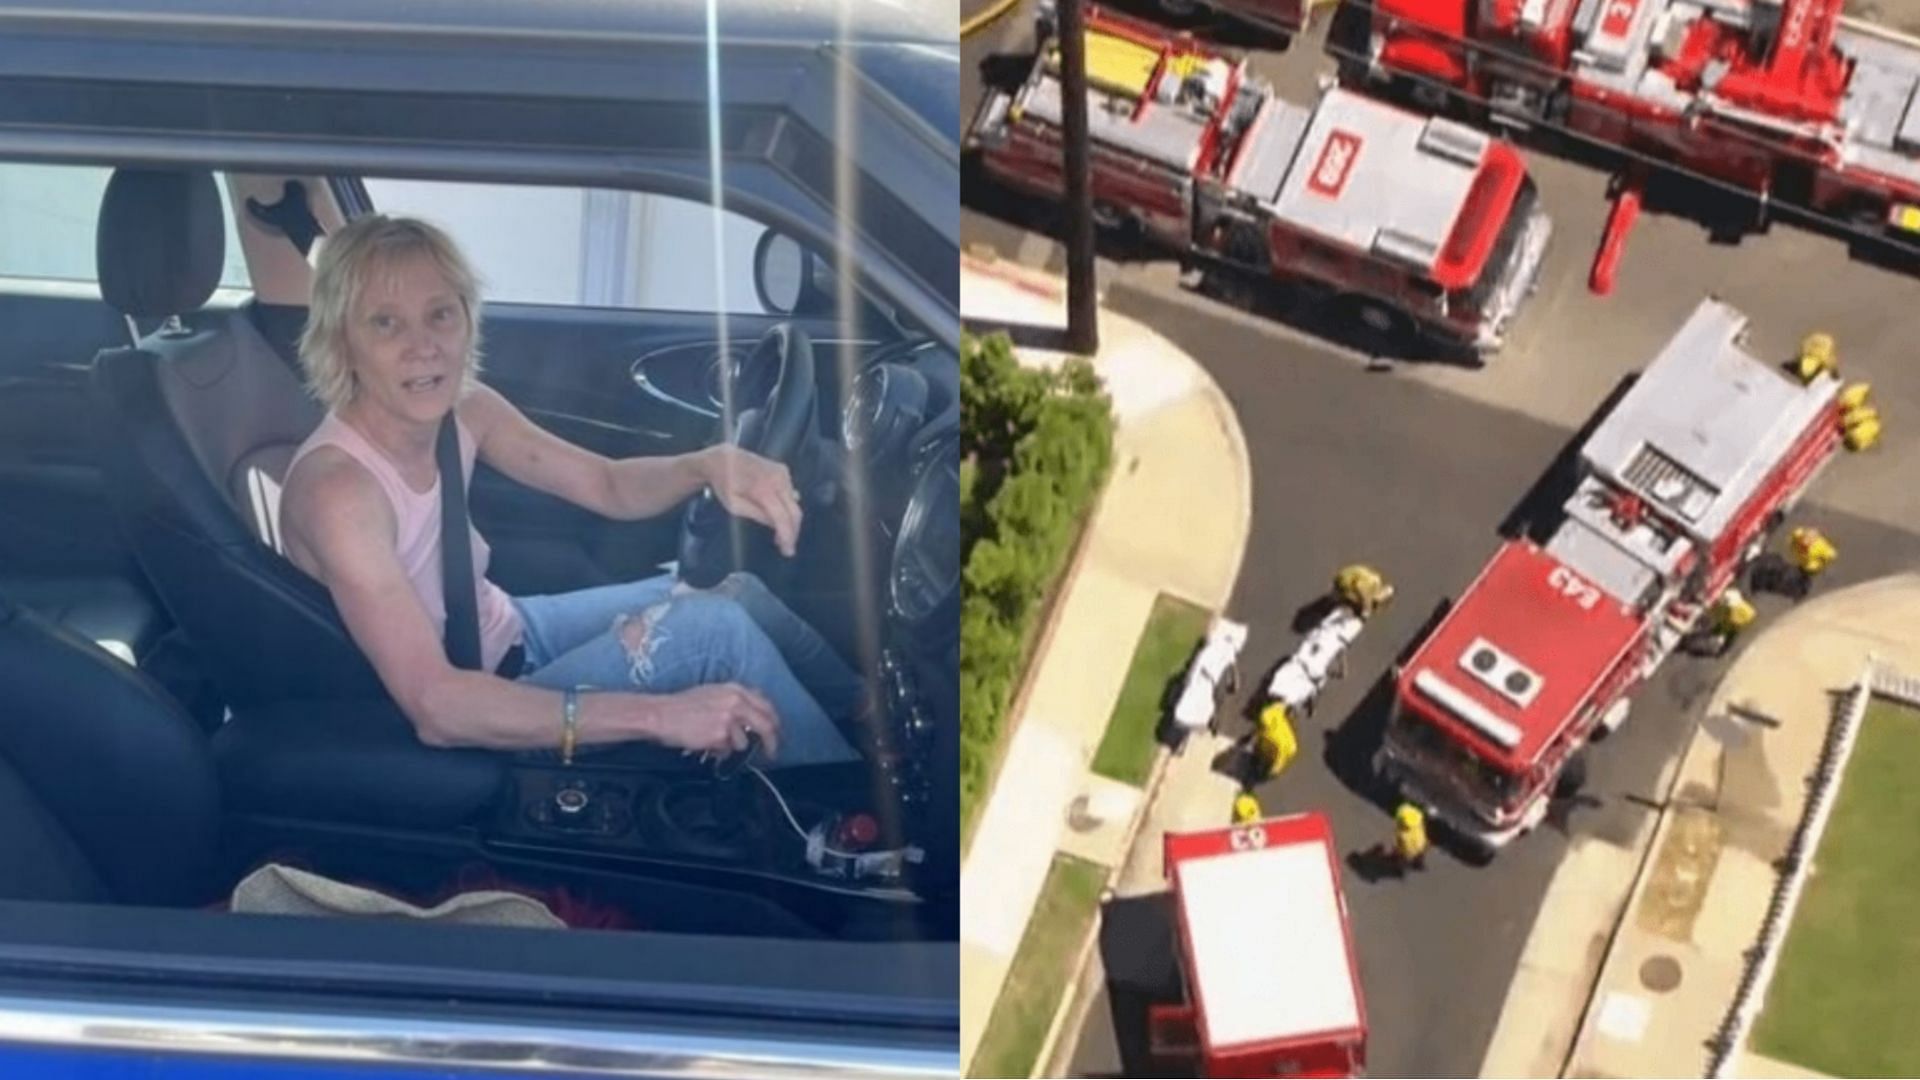 Video of Anne Heche driving moments before the crash went viral (Images via Backgrid)